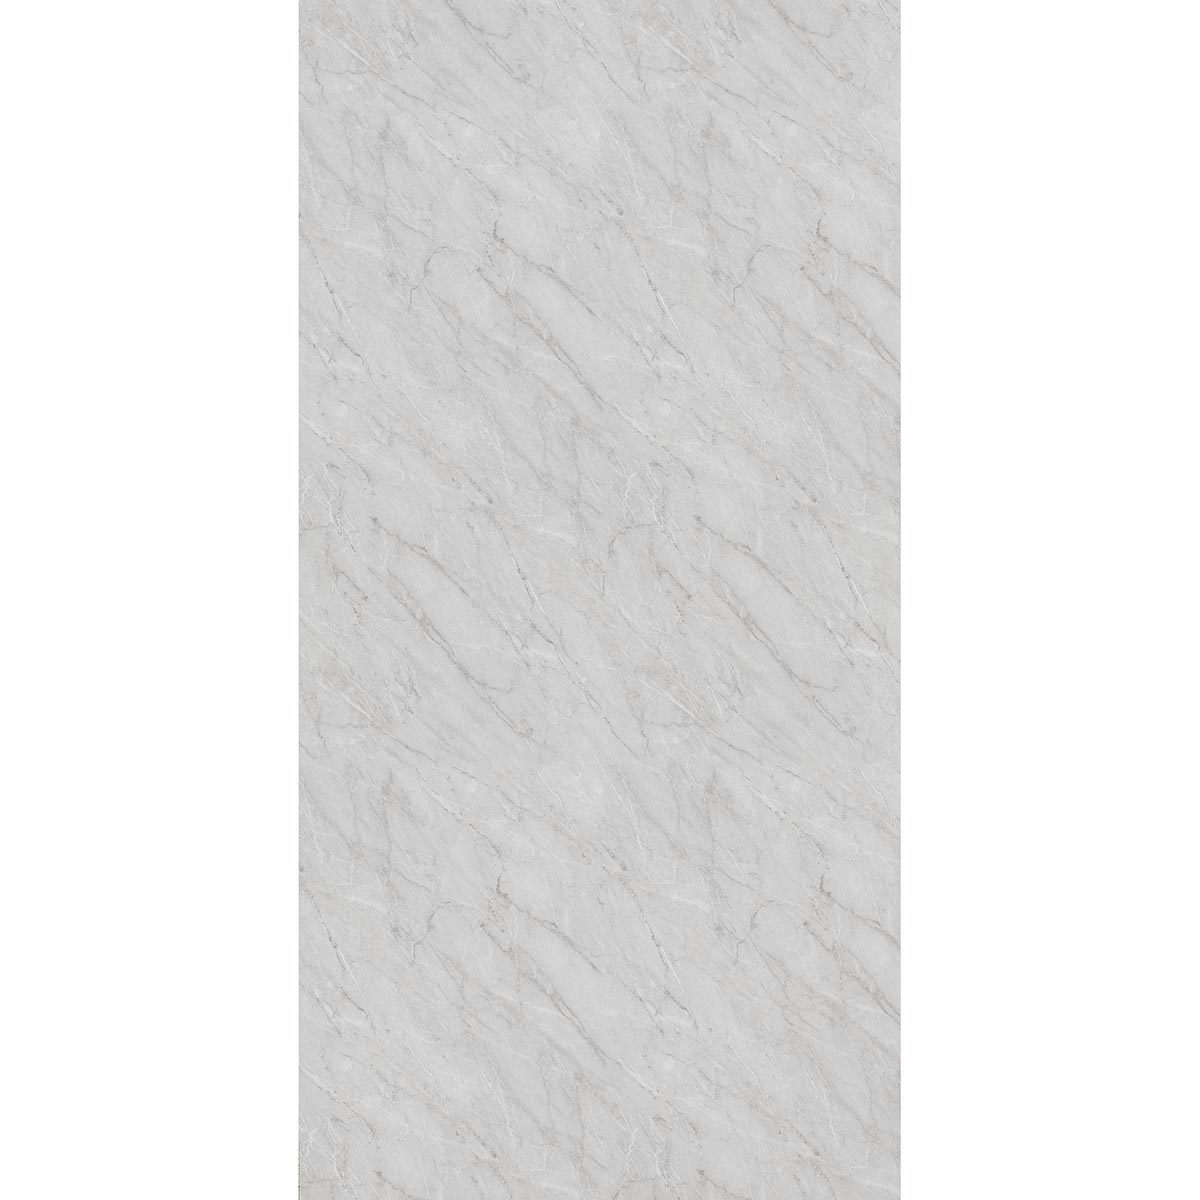 Showerwall Apollo Marble shower wall panel 1200 x 2440